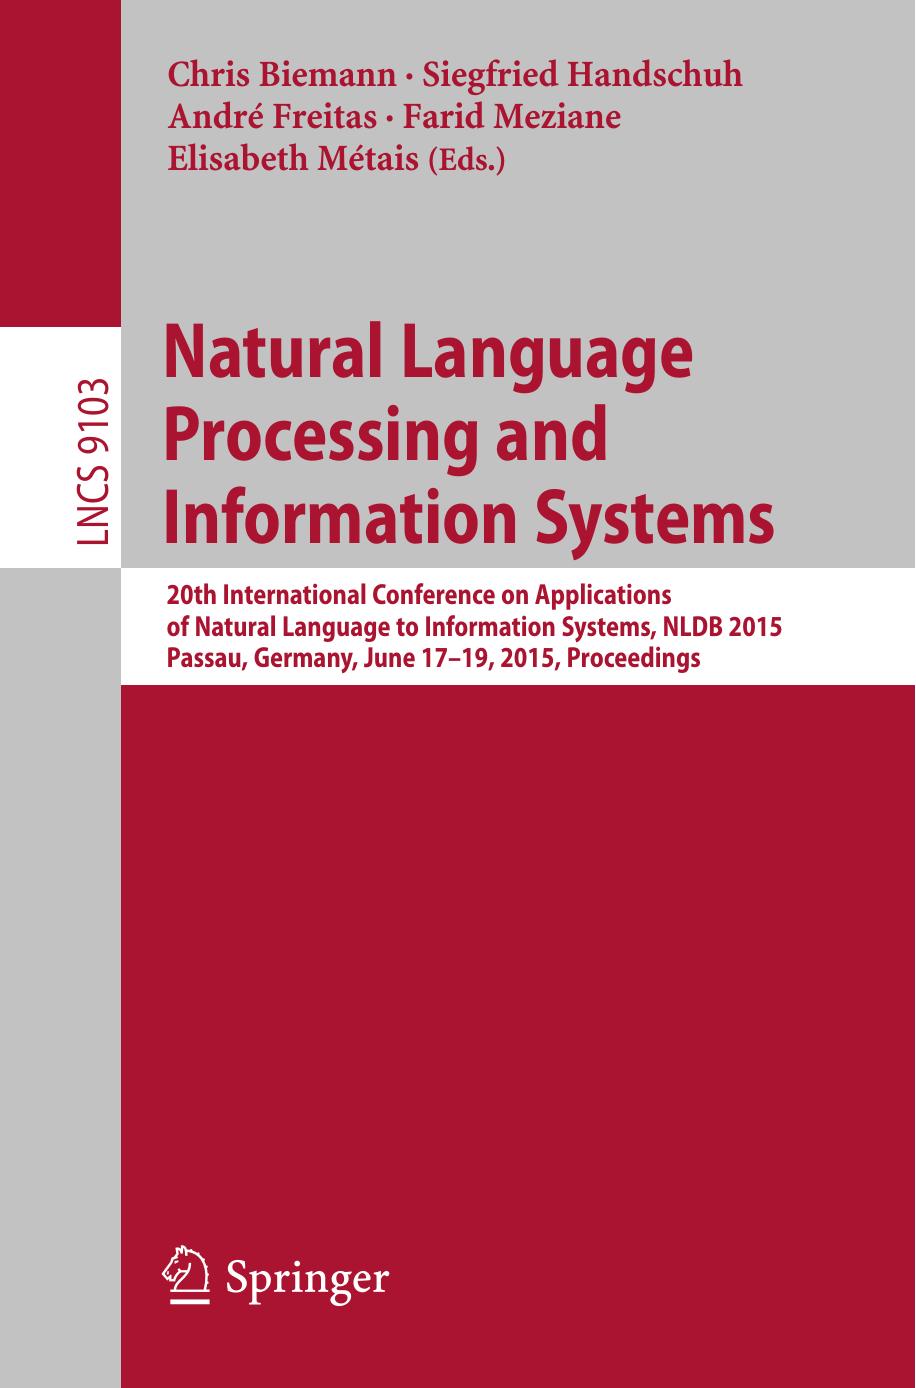 Natural Language Processing and Information Systems: 20th International Conference on Applications of Natural Language to Information Systems, NLDB 2015, Passau, Germany, June 17-19, 2015, Proceedings